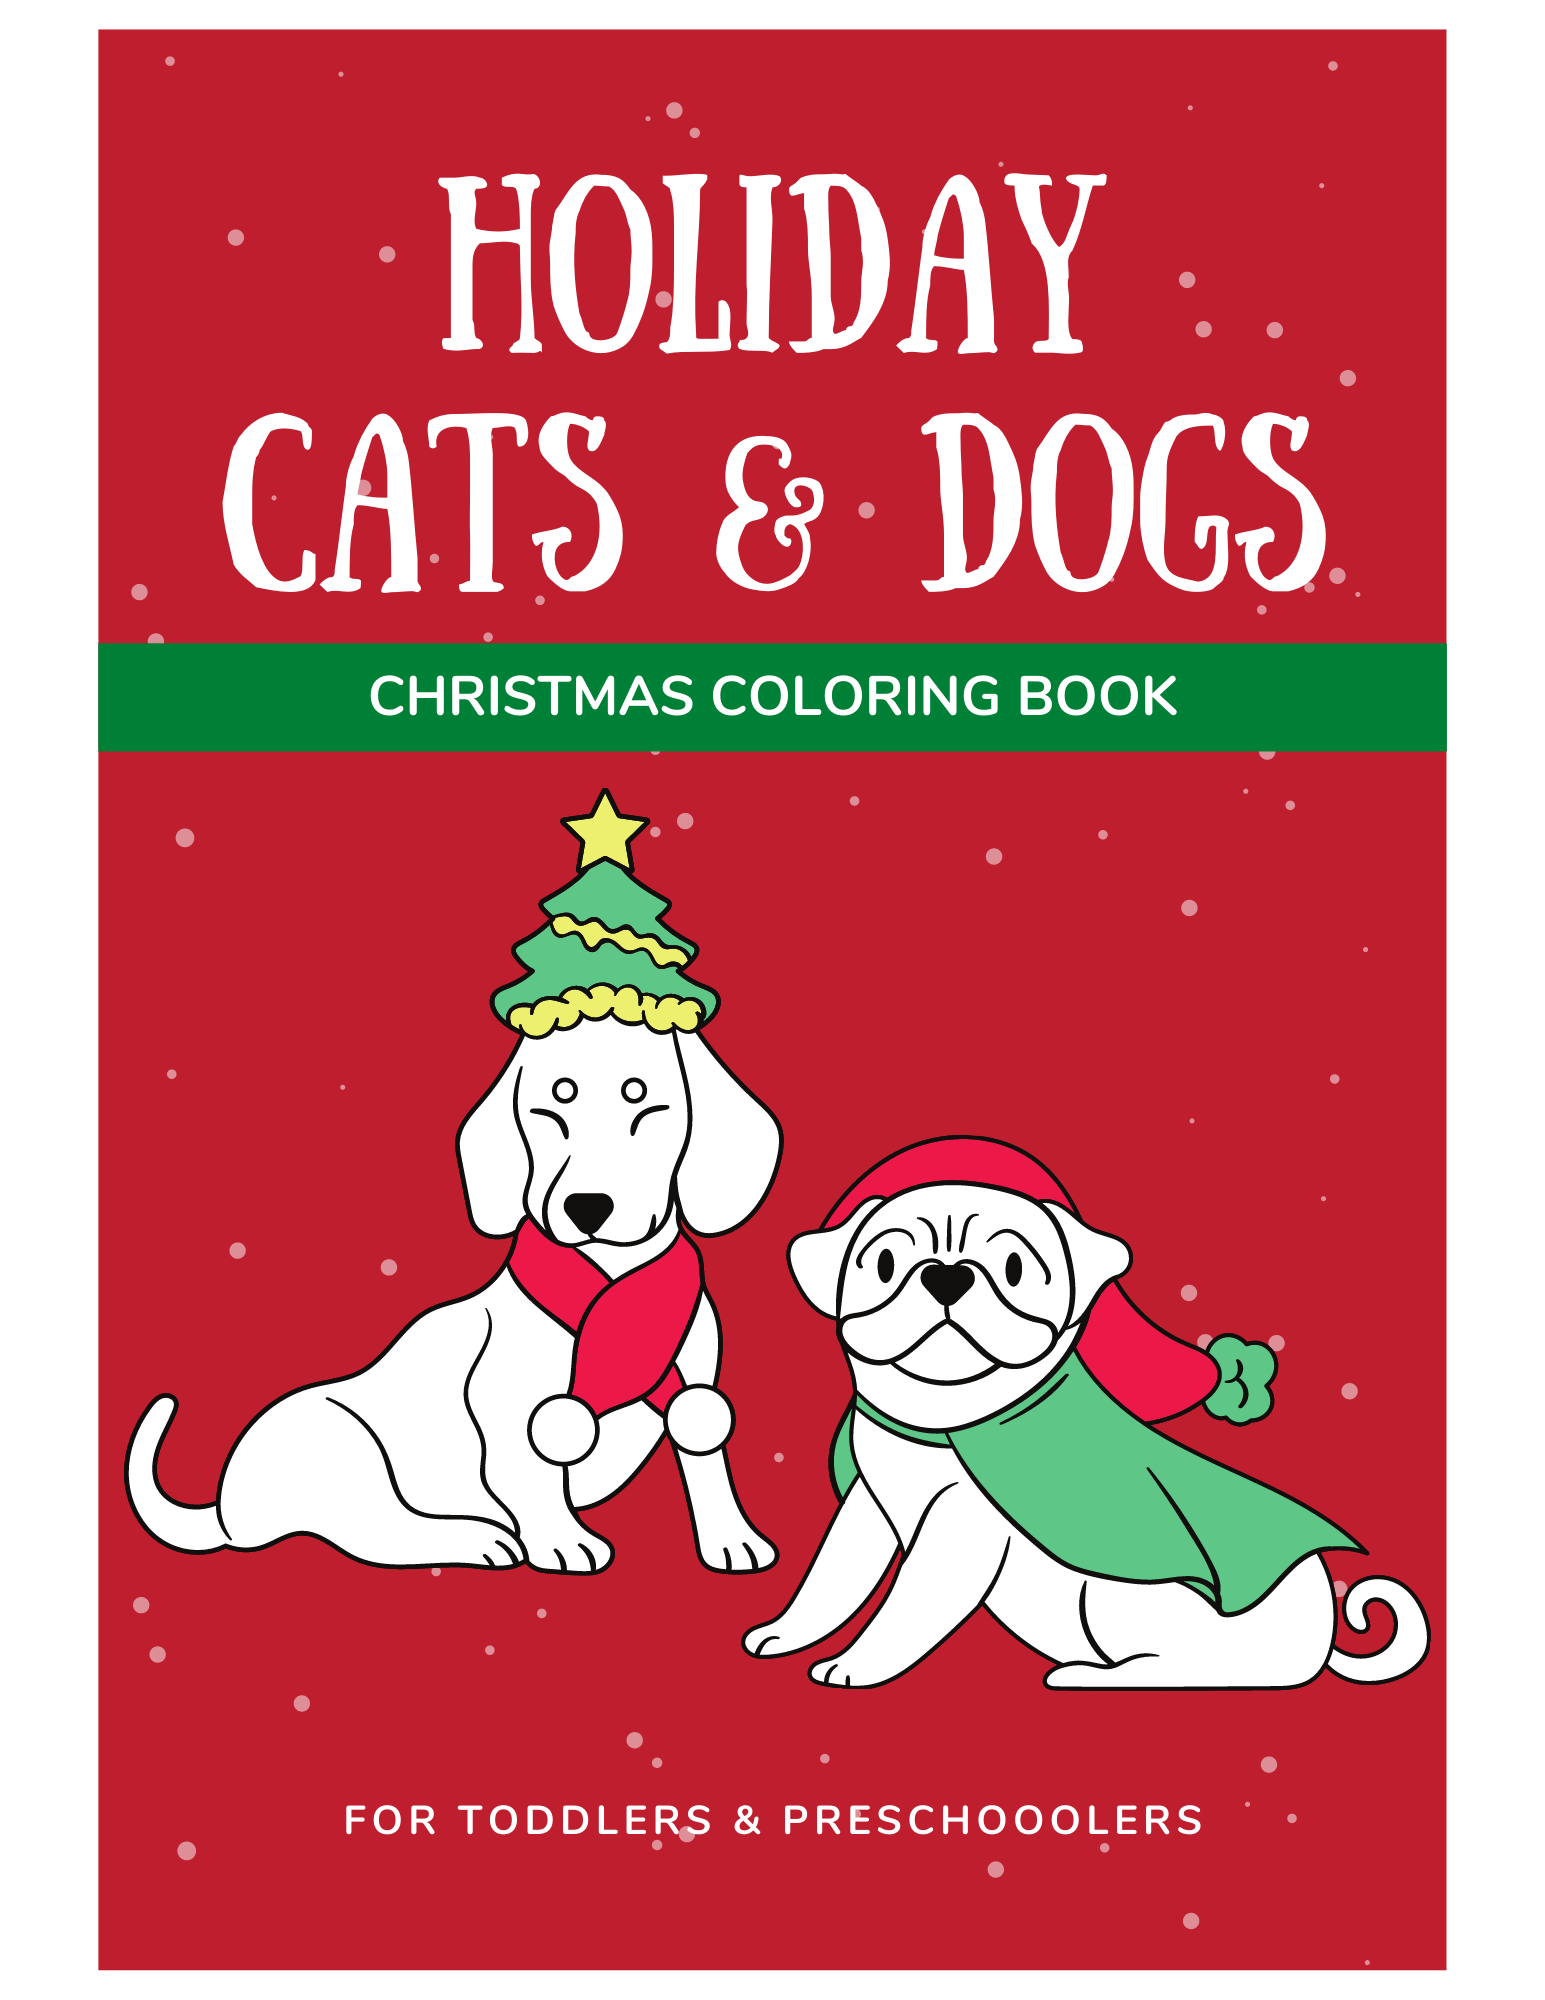 Get your free copy of Christmas Coloring Book: Holiday Cats & Dogs